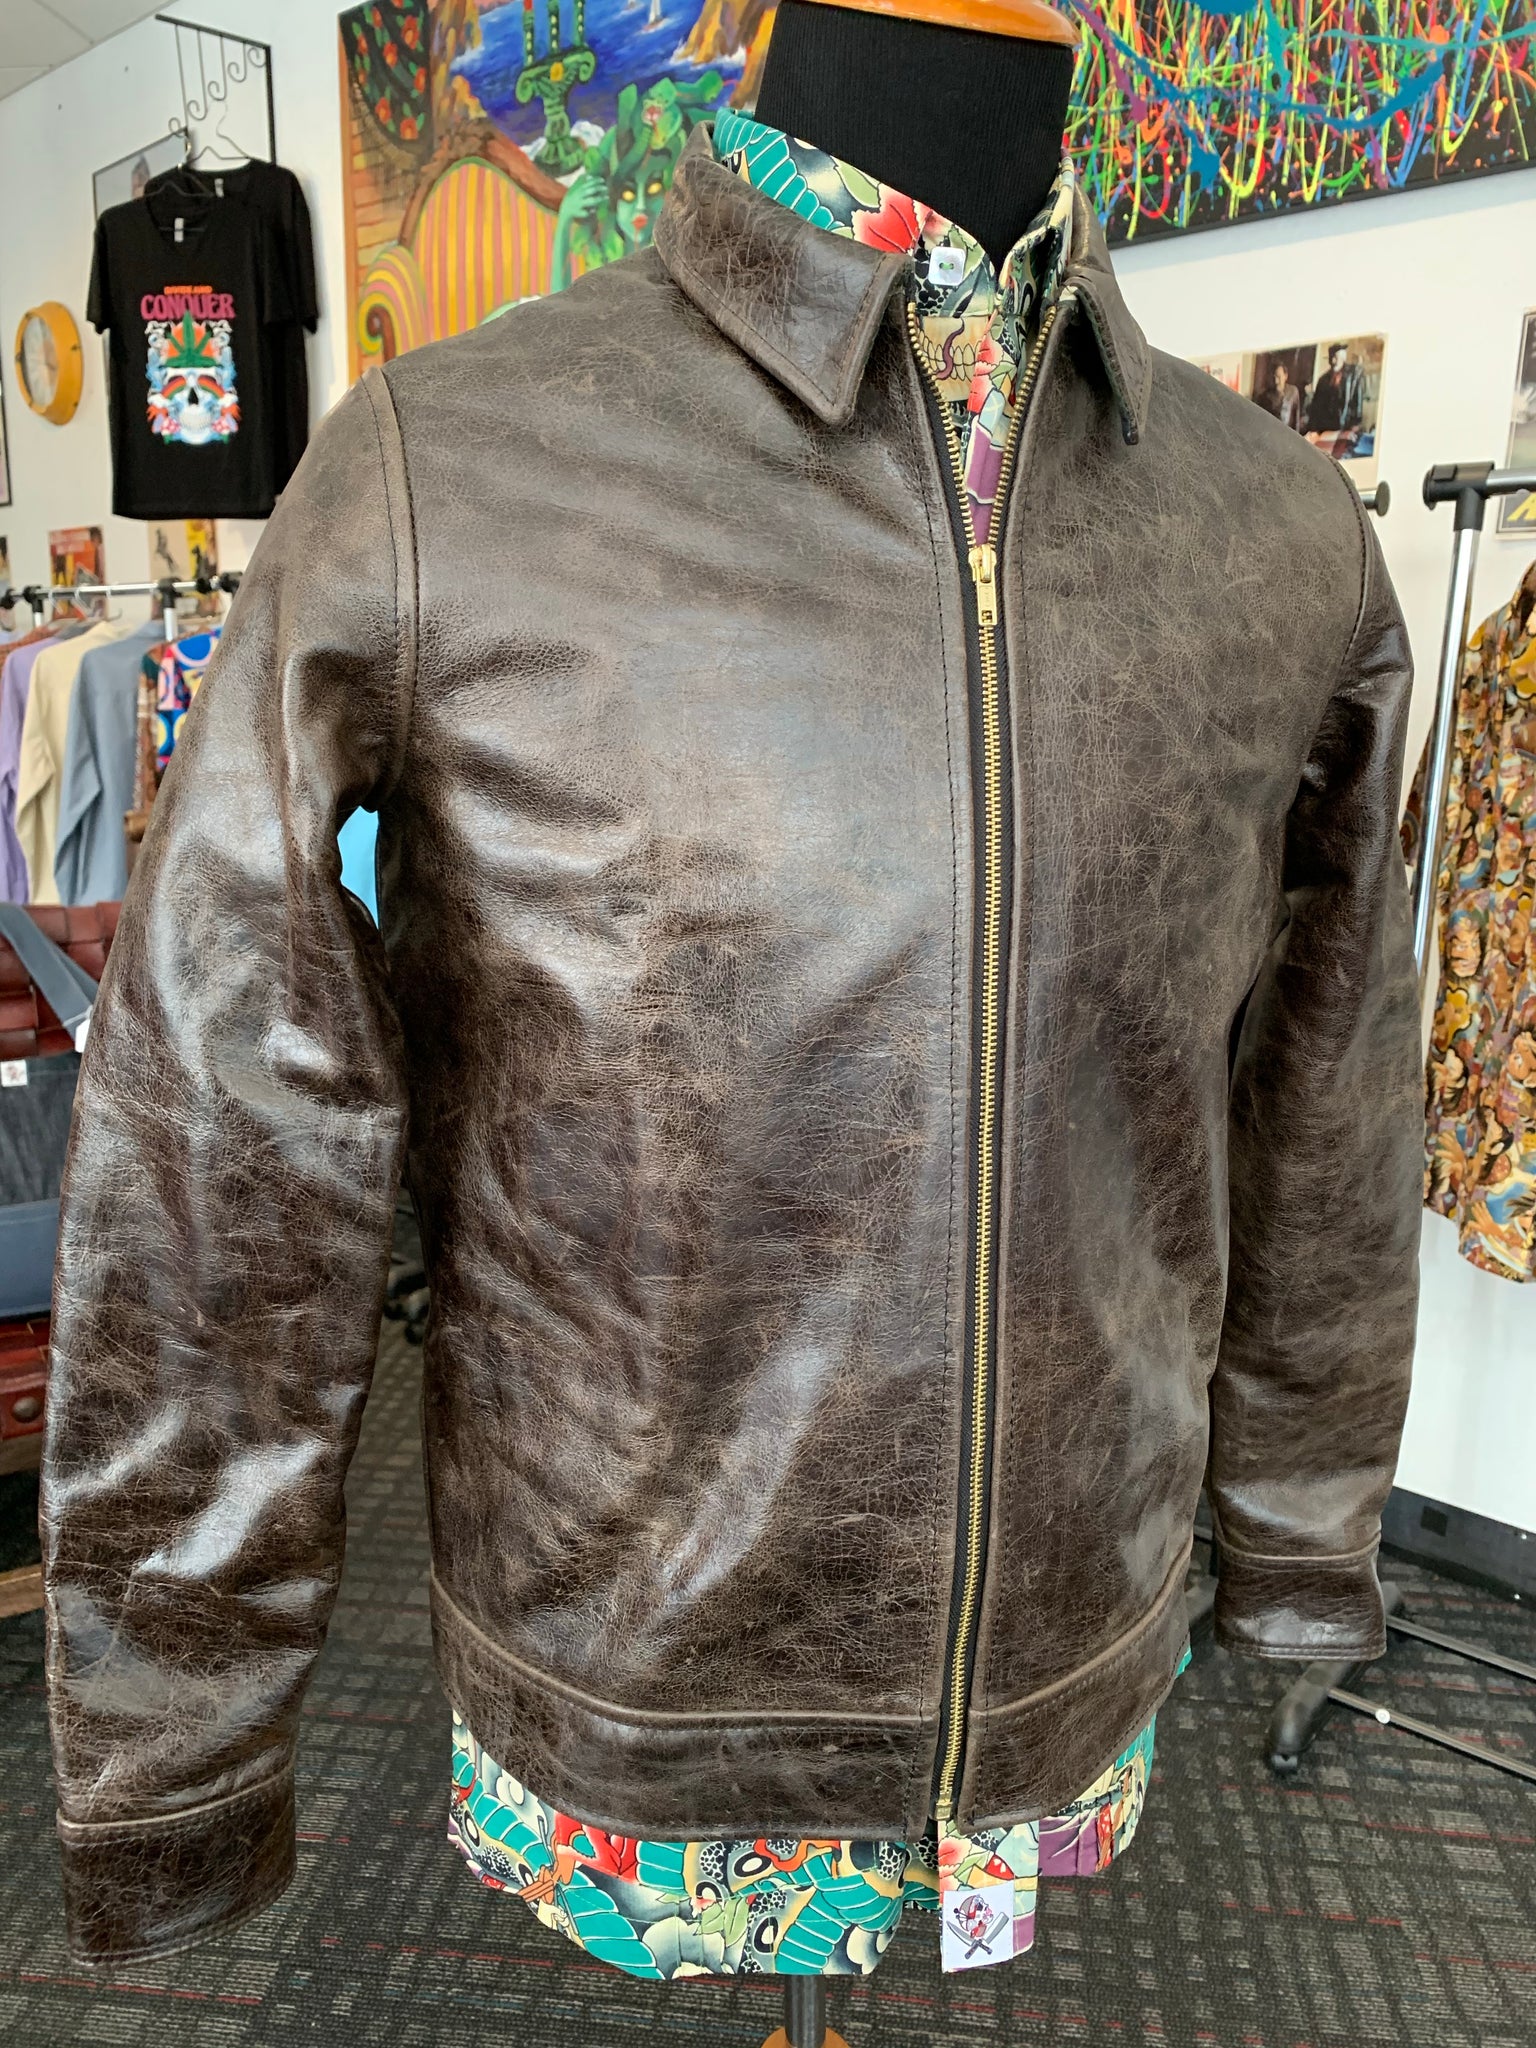 The getaway driver leather jacket